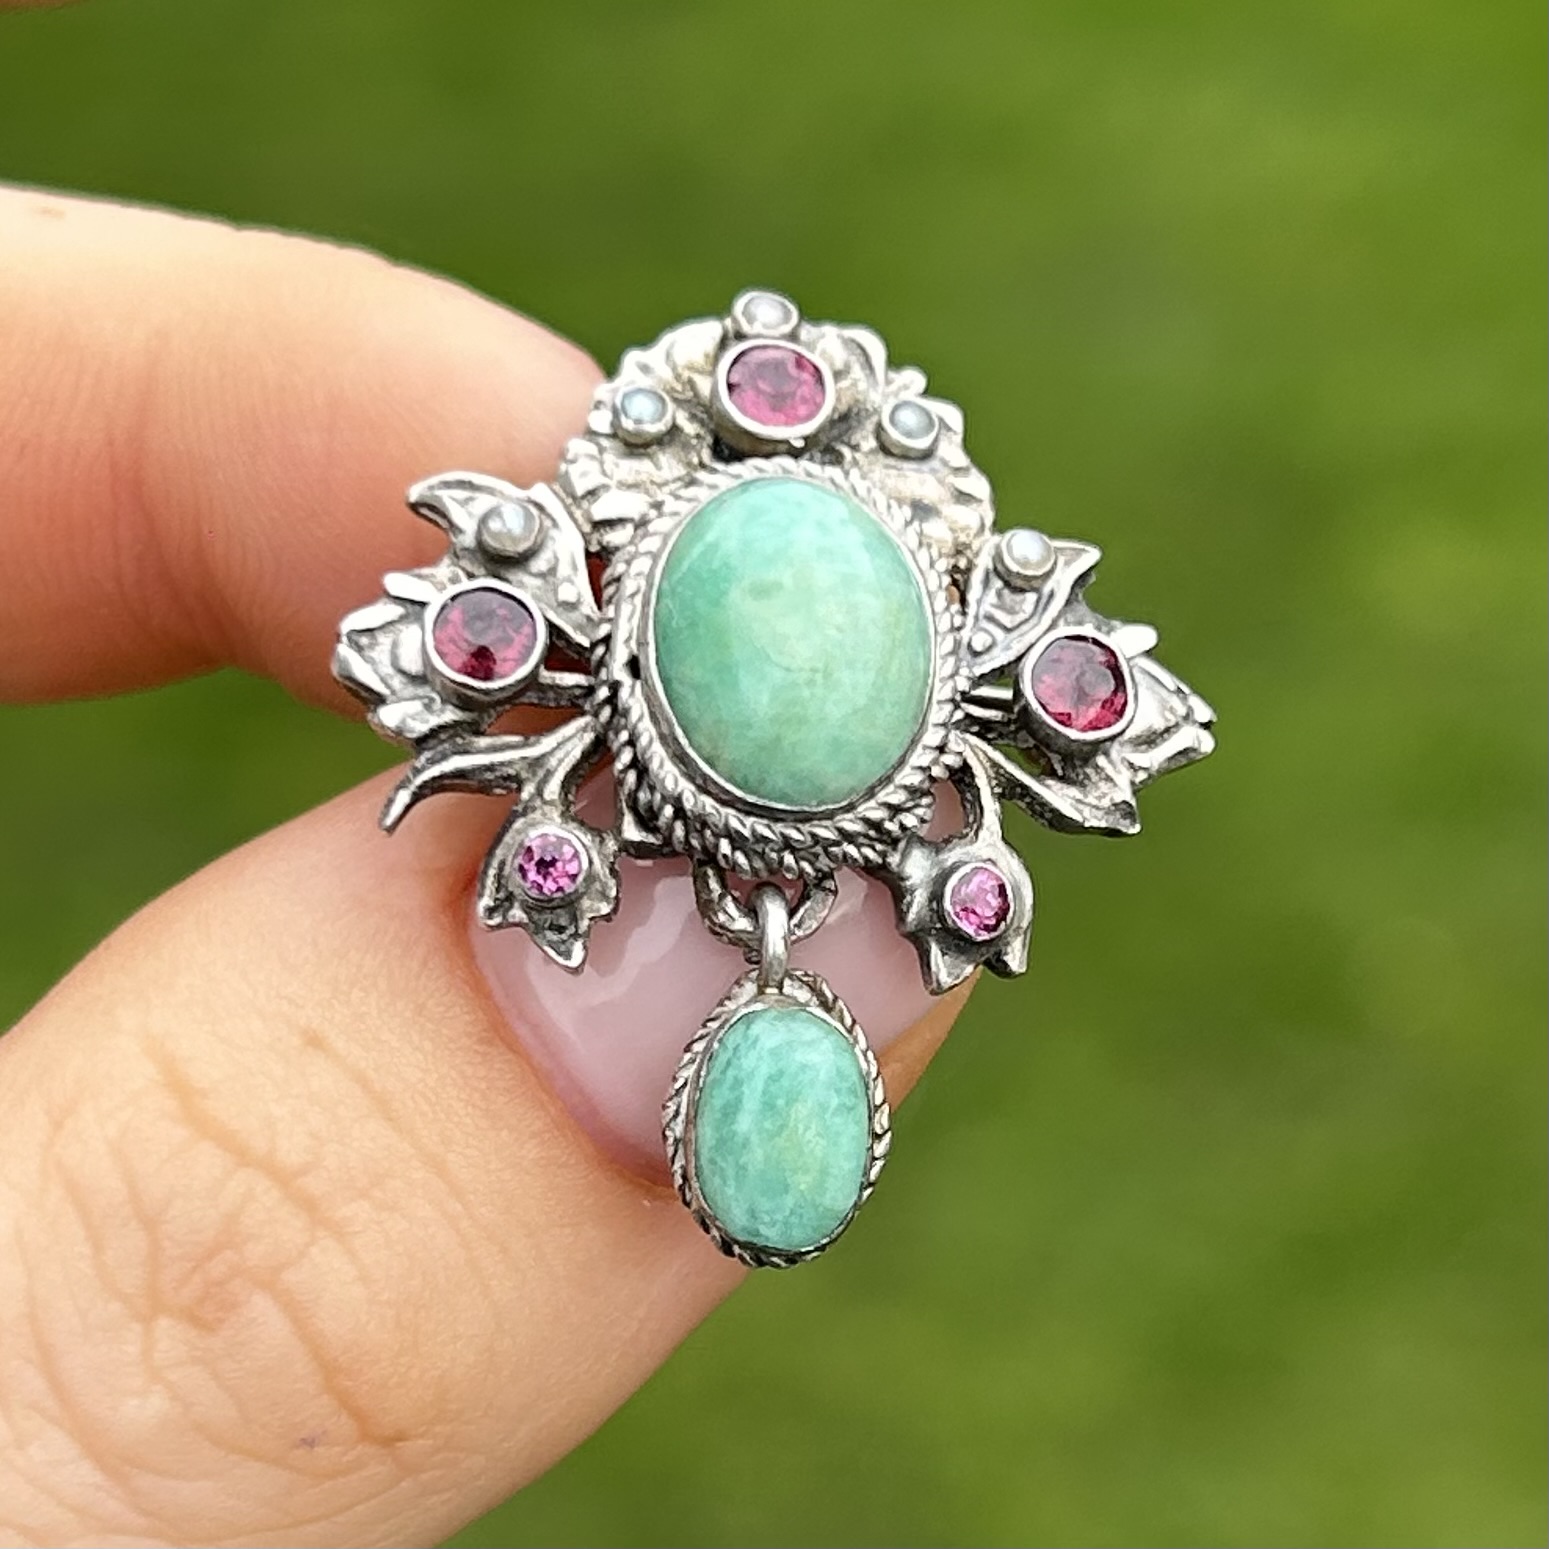 Silver Austro-Hungarian brooch set with gemstone and seed pearl (6g) - Image 3 of 9